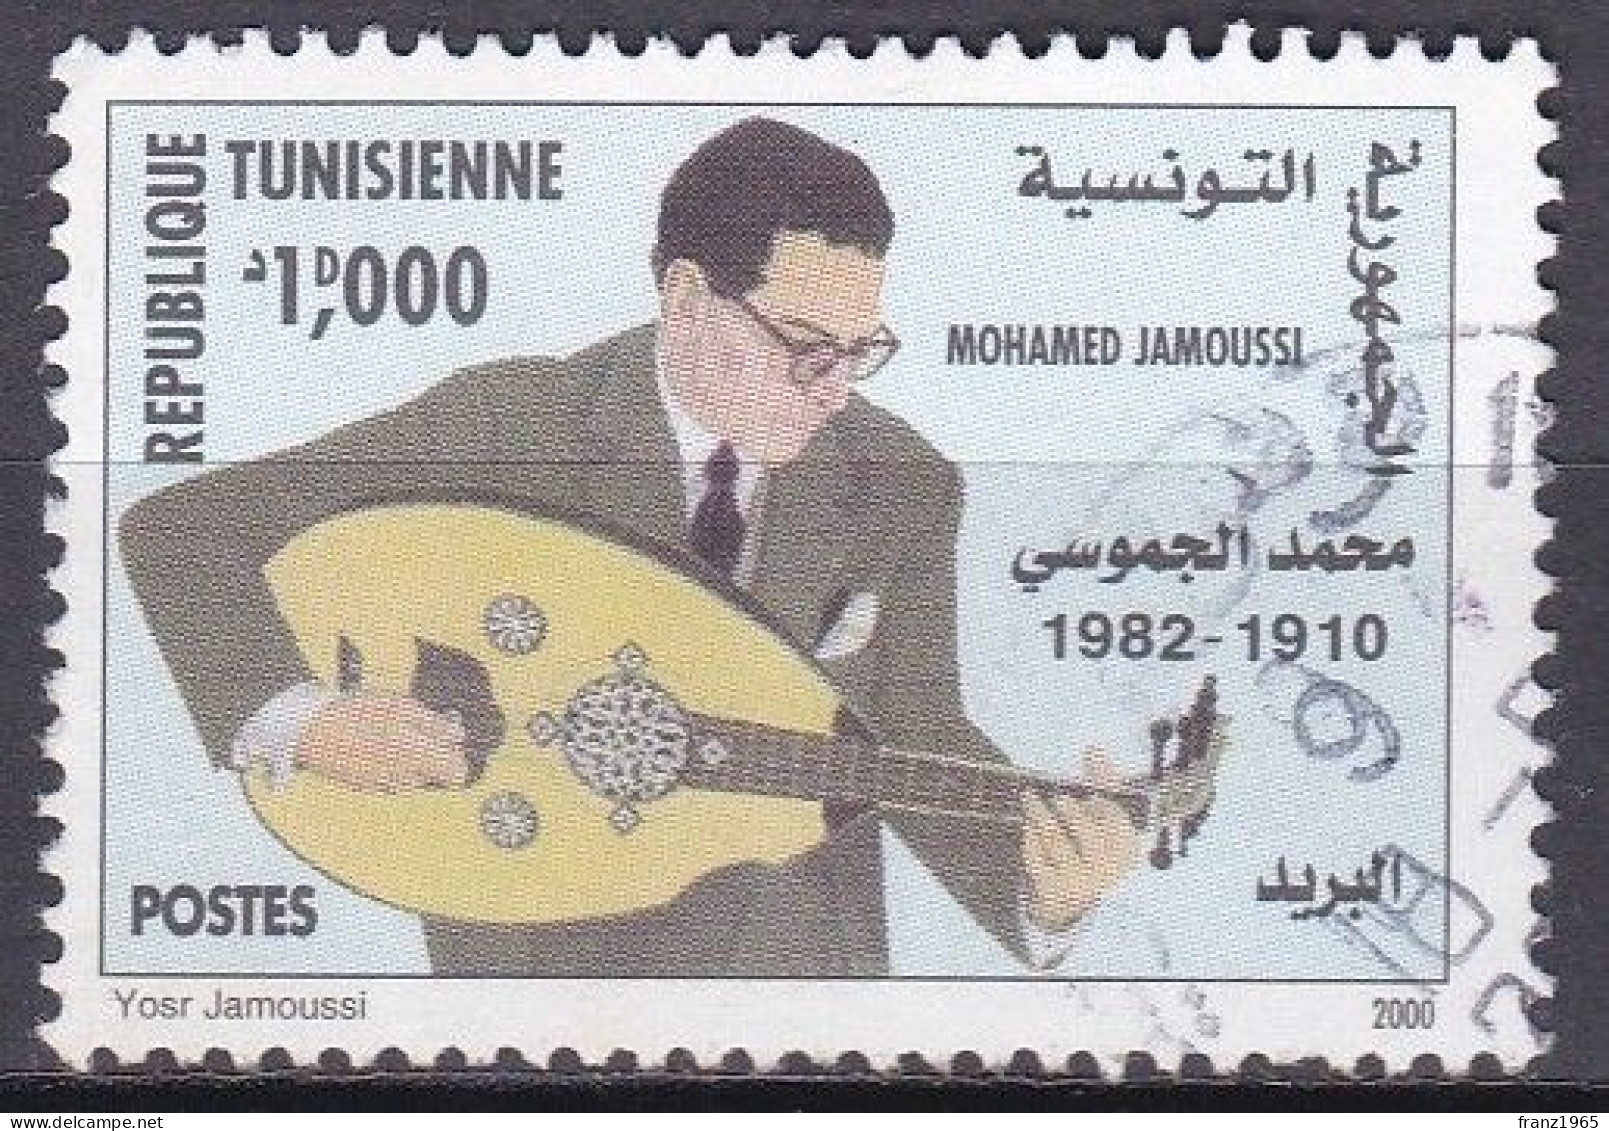 Mohamed Jamoussi - 2000 - Tunisia (1956-...)